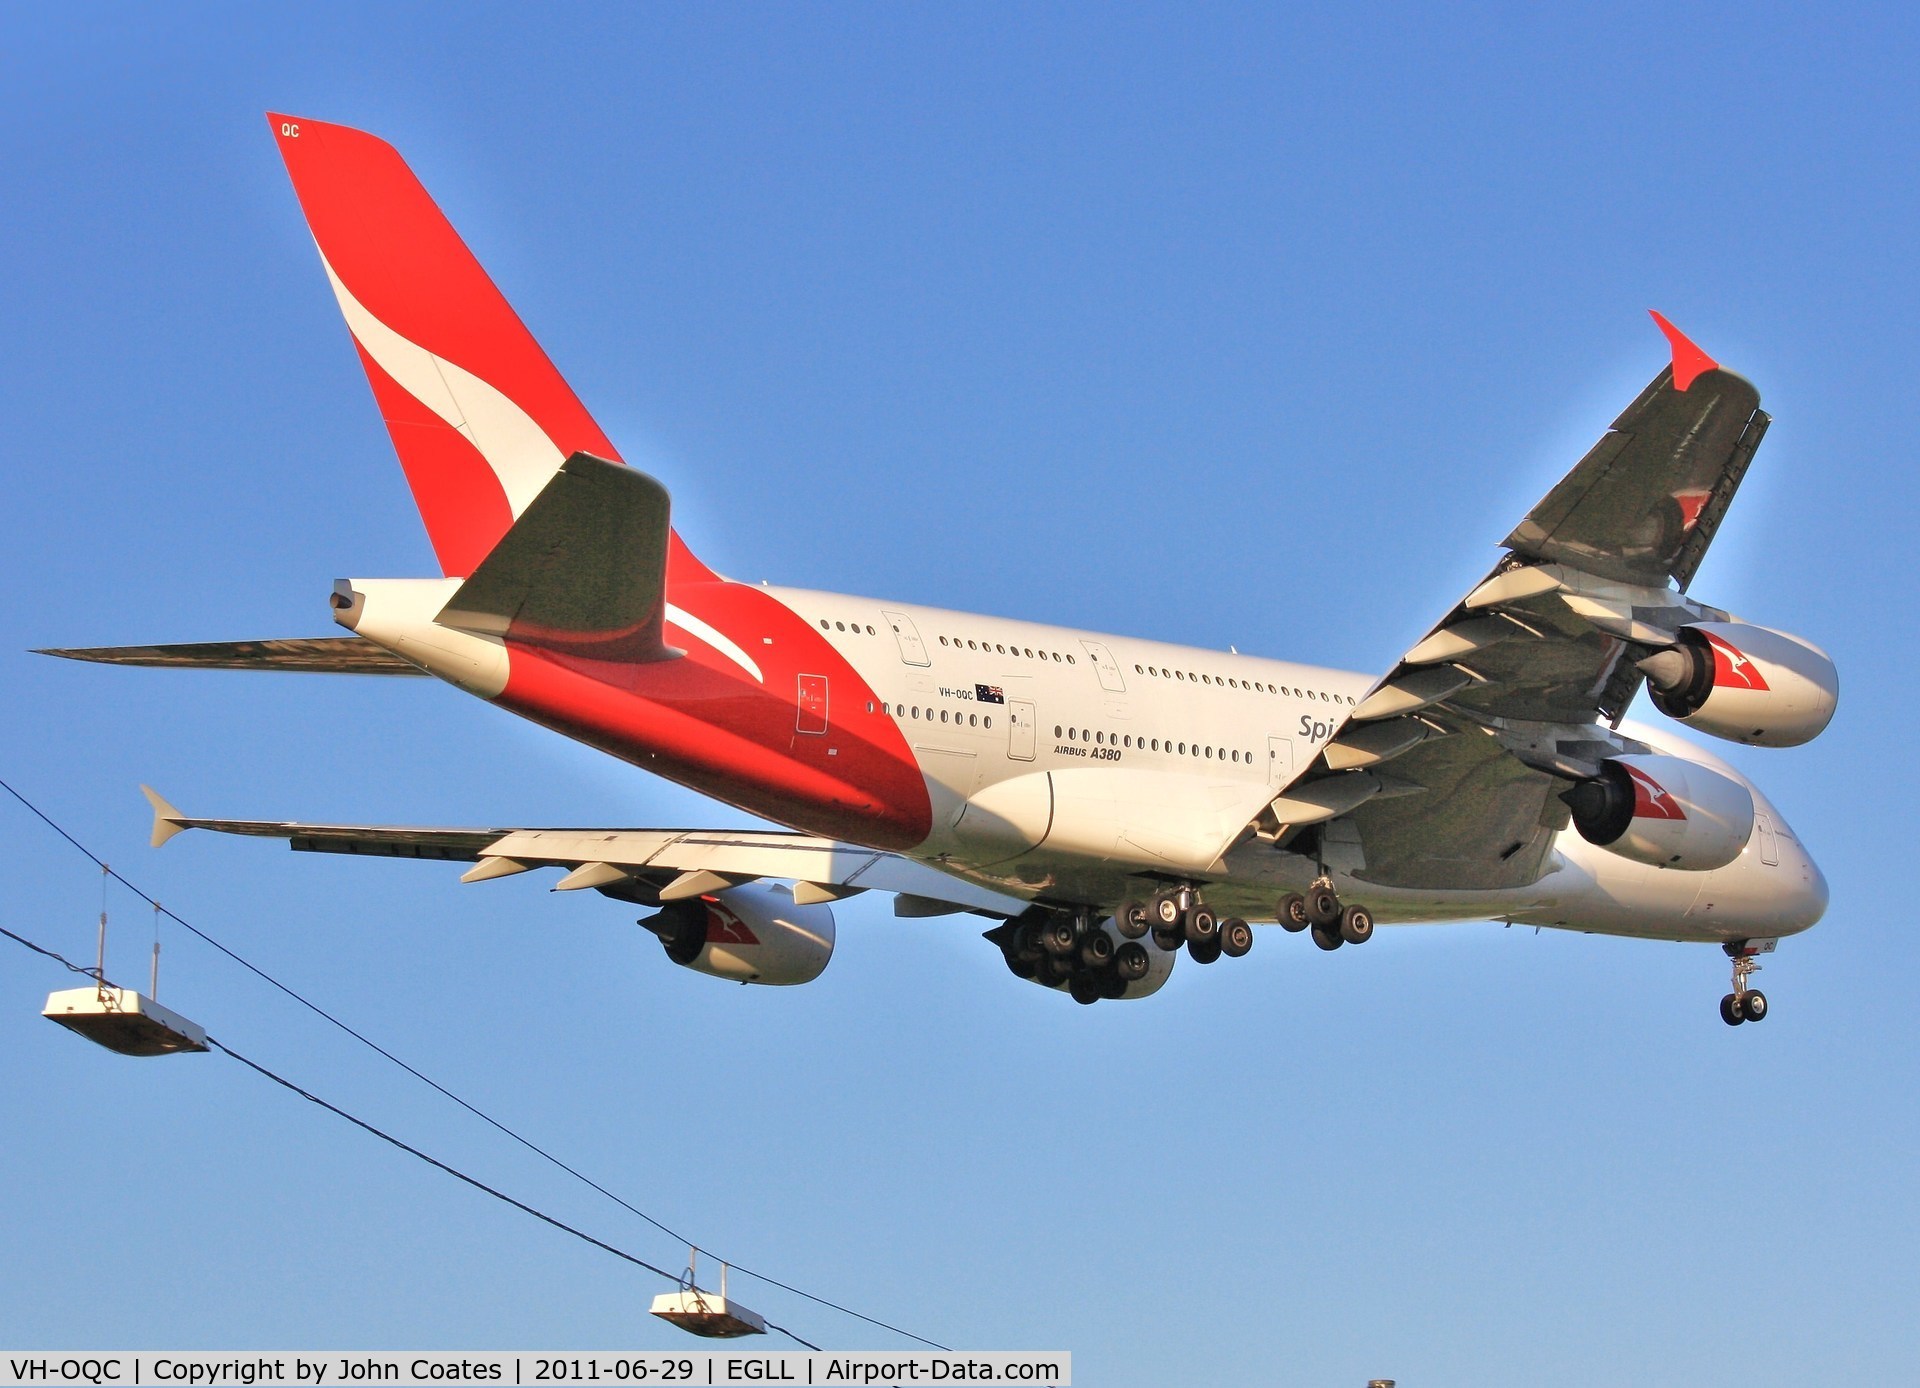 VH-OQC, 2008 Airbus A380-842 C/N 022, Over the A30 to touchdown